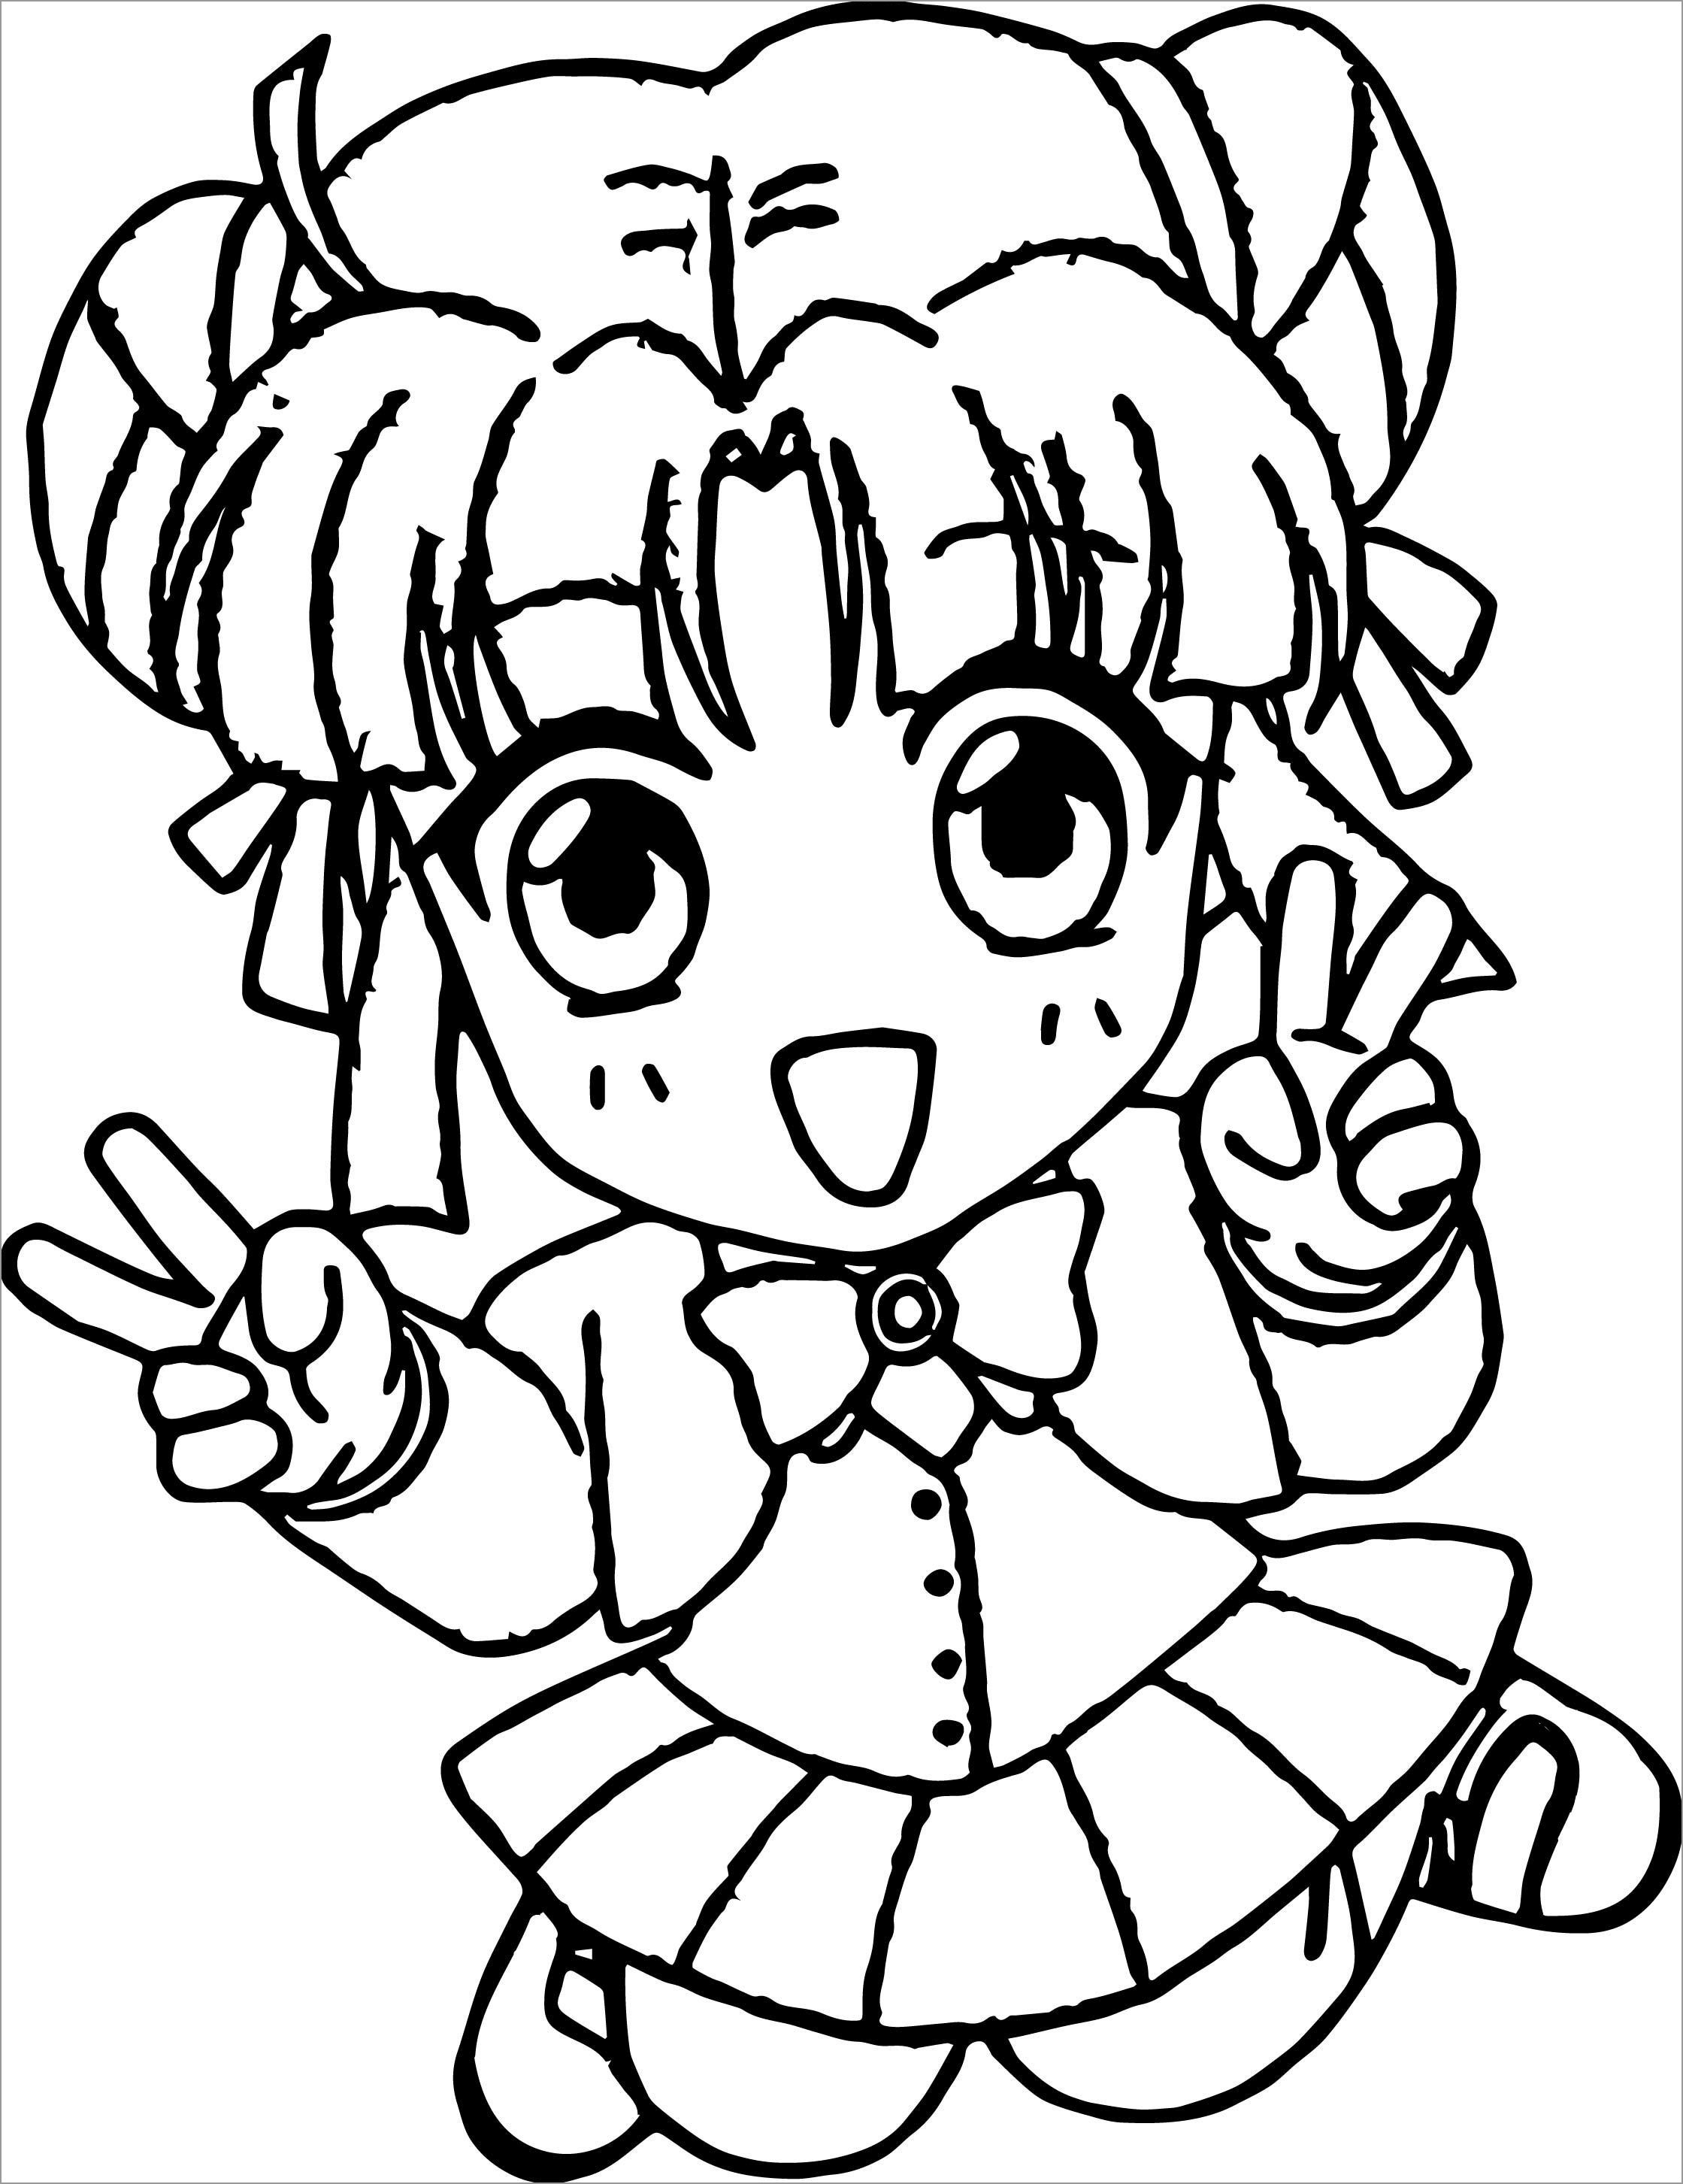 Cute Anime Chibi Girl Coloring Page for Kids   ColoringBay